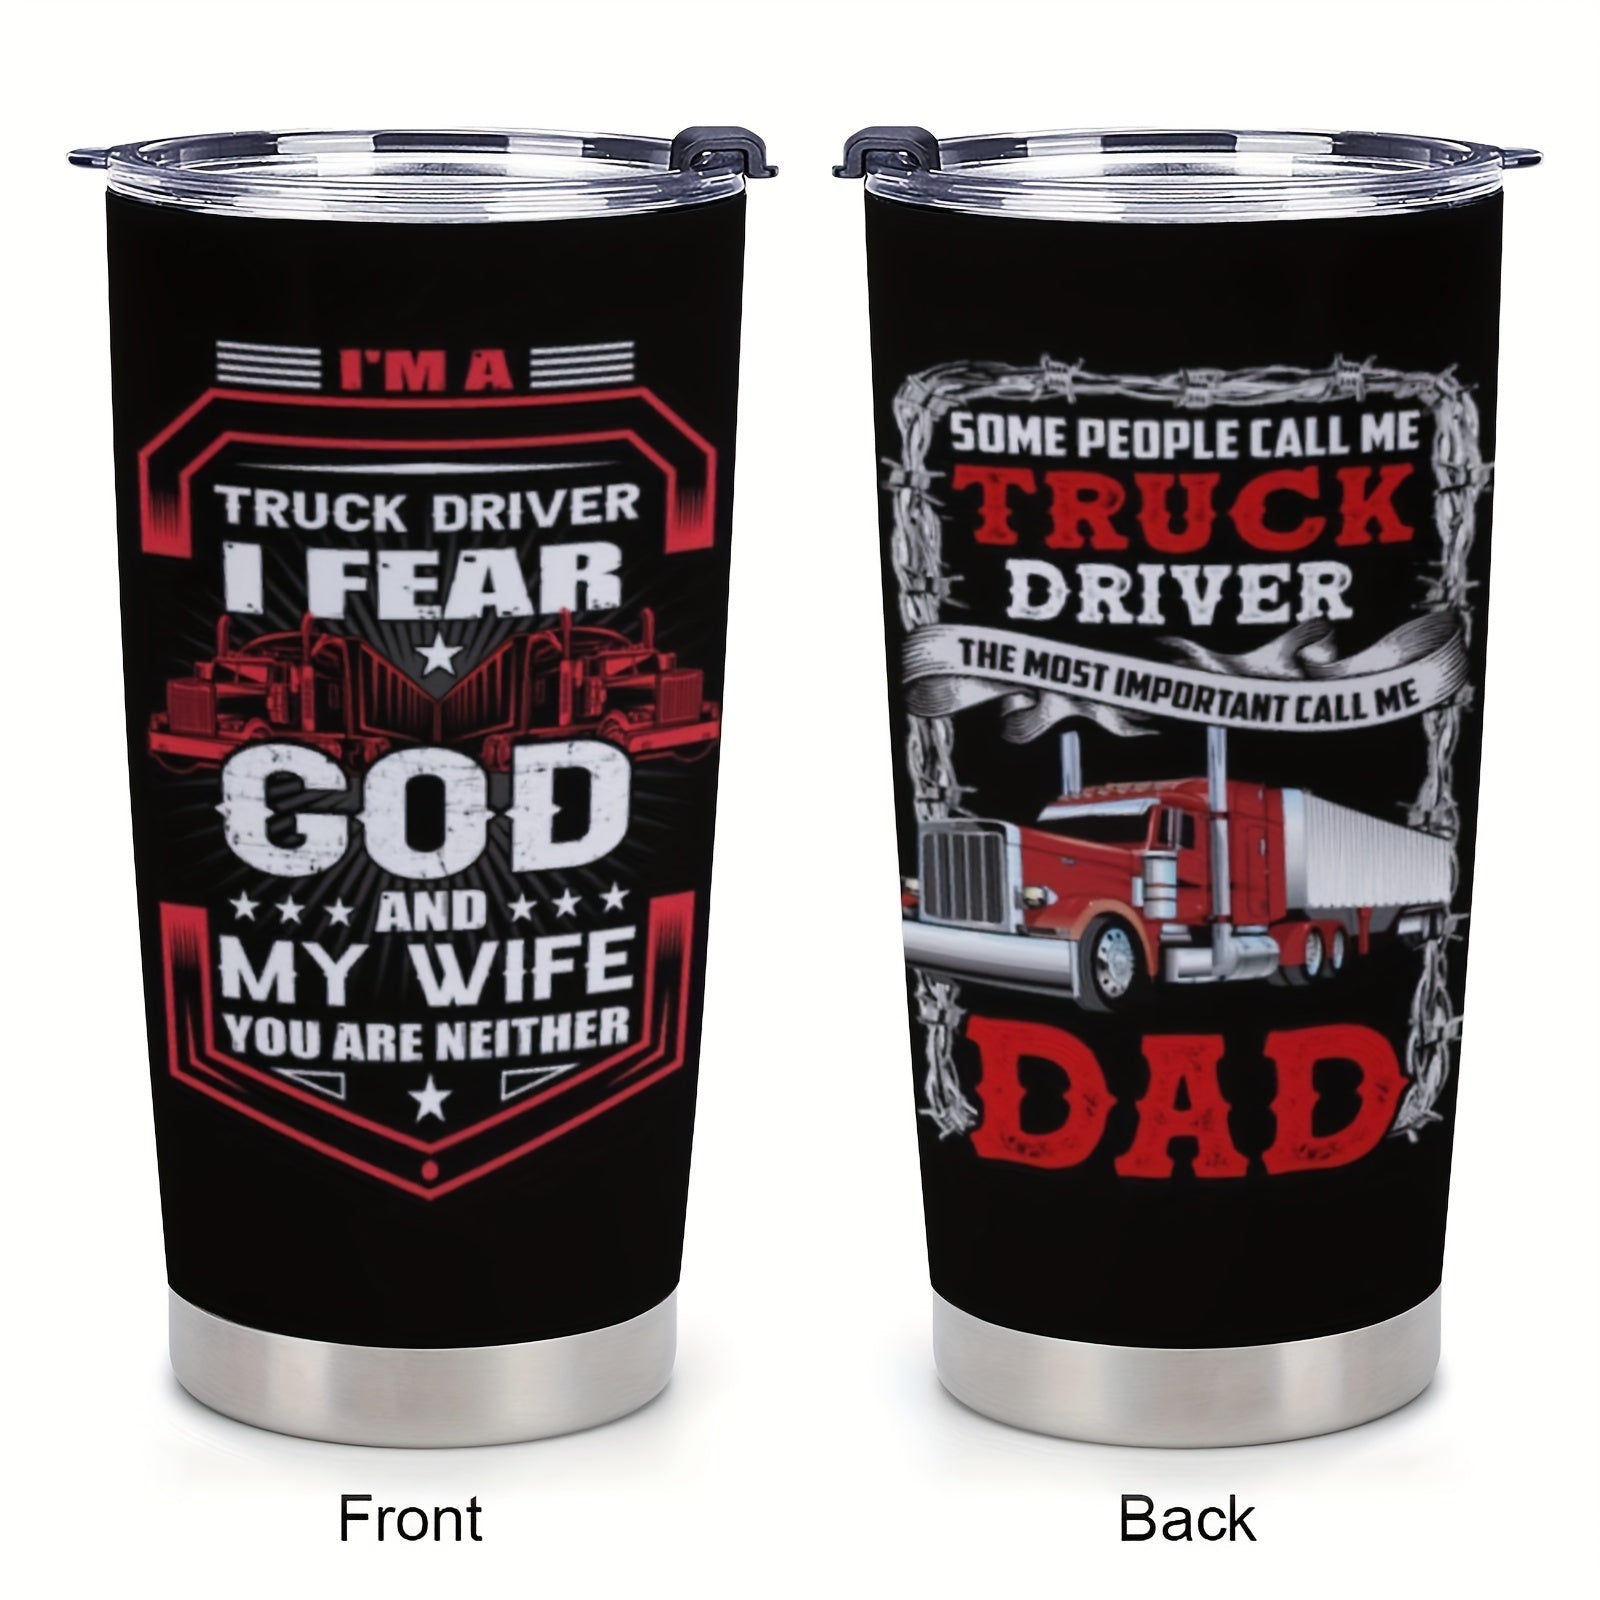 I'm A Truck Driver I Fear God And My Wife You Are Neither, Stainless Steel Insulated Christian Tumbler 20oz claimedbygoddesigns